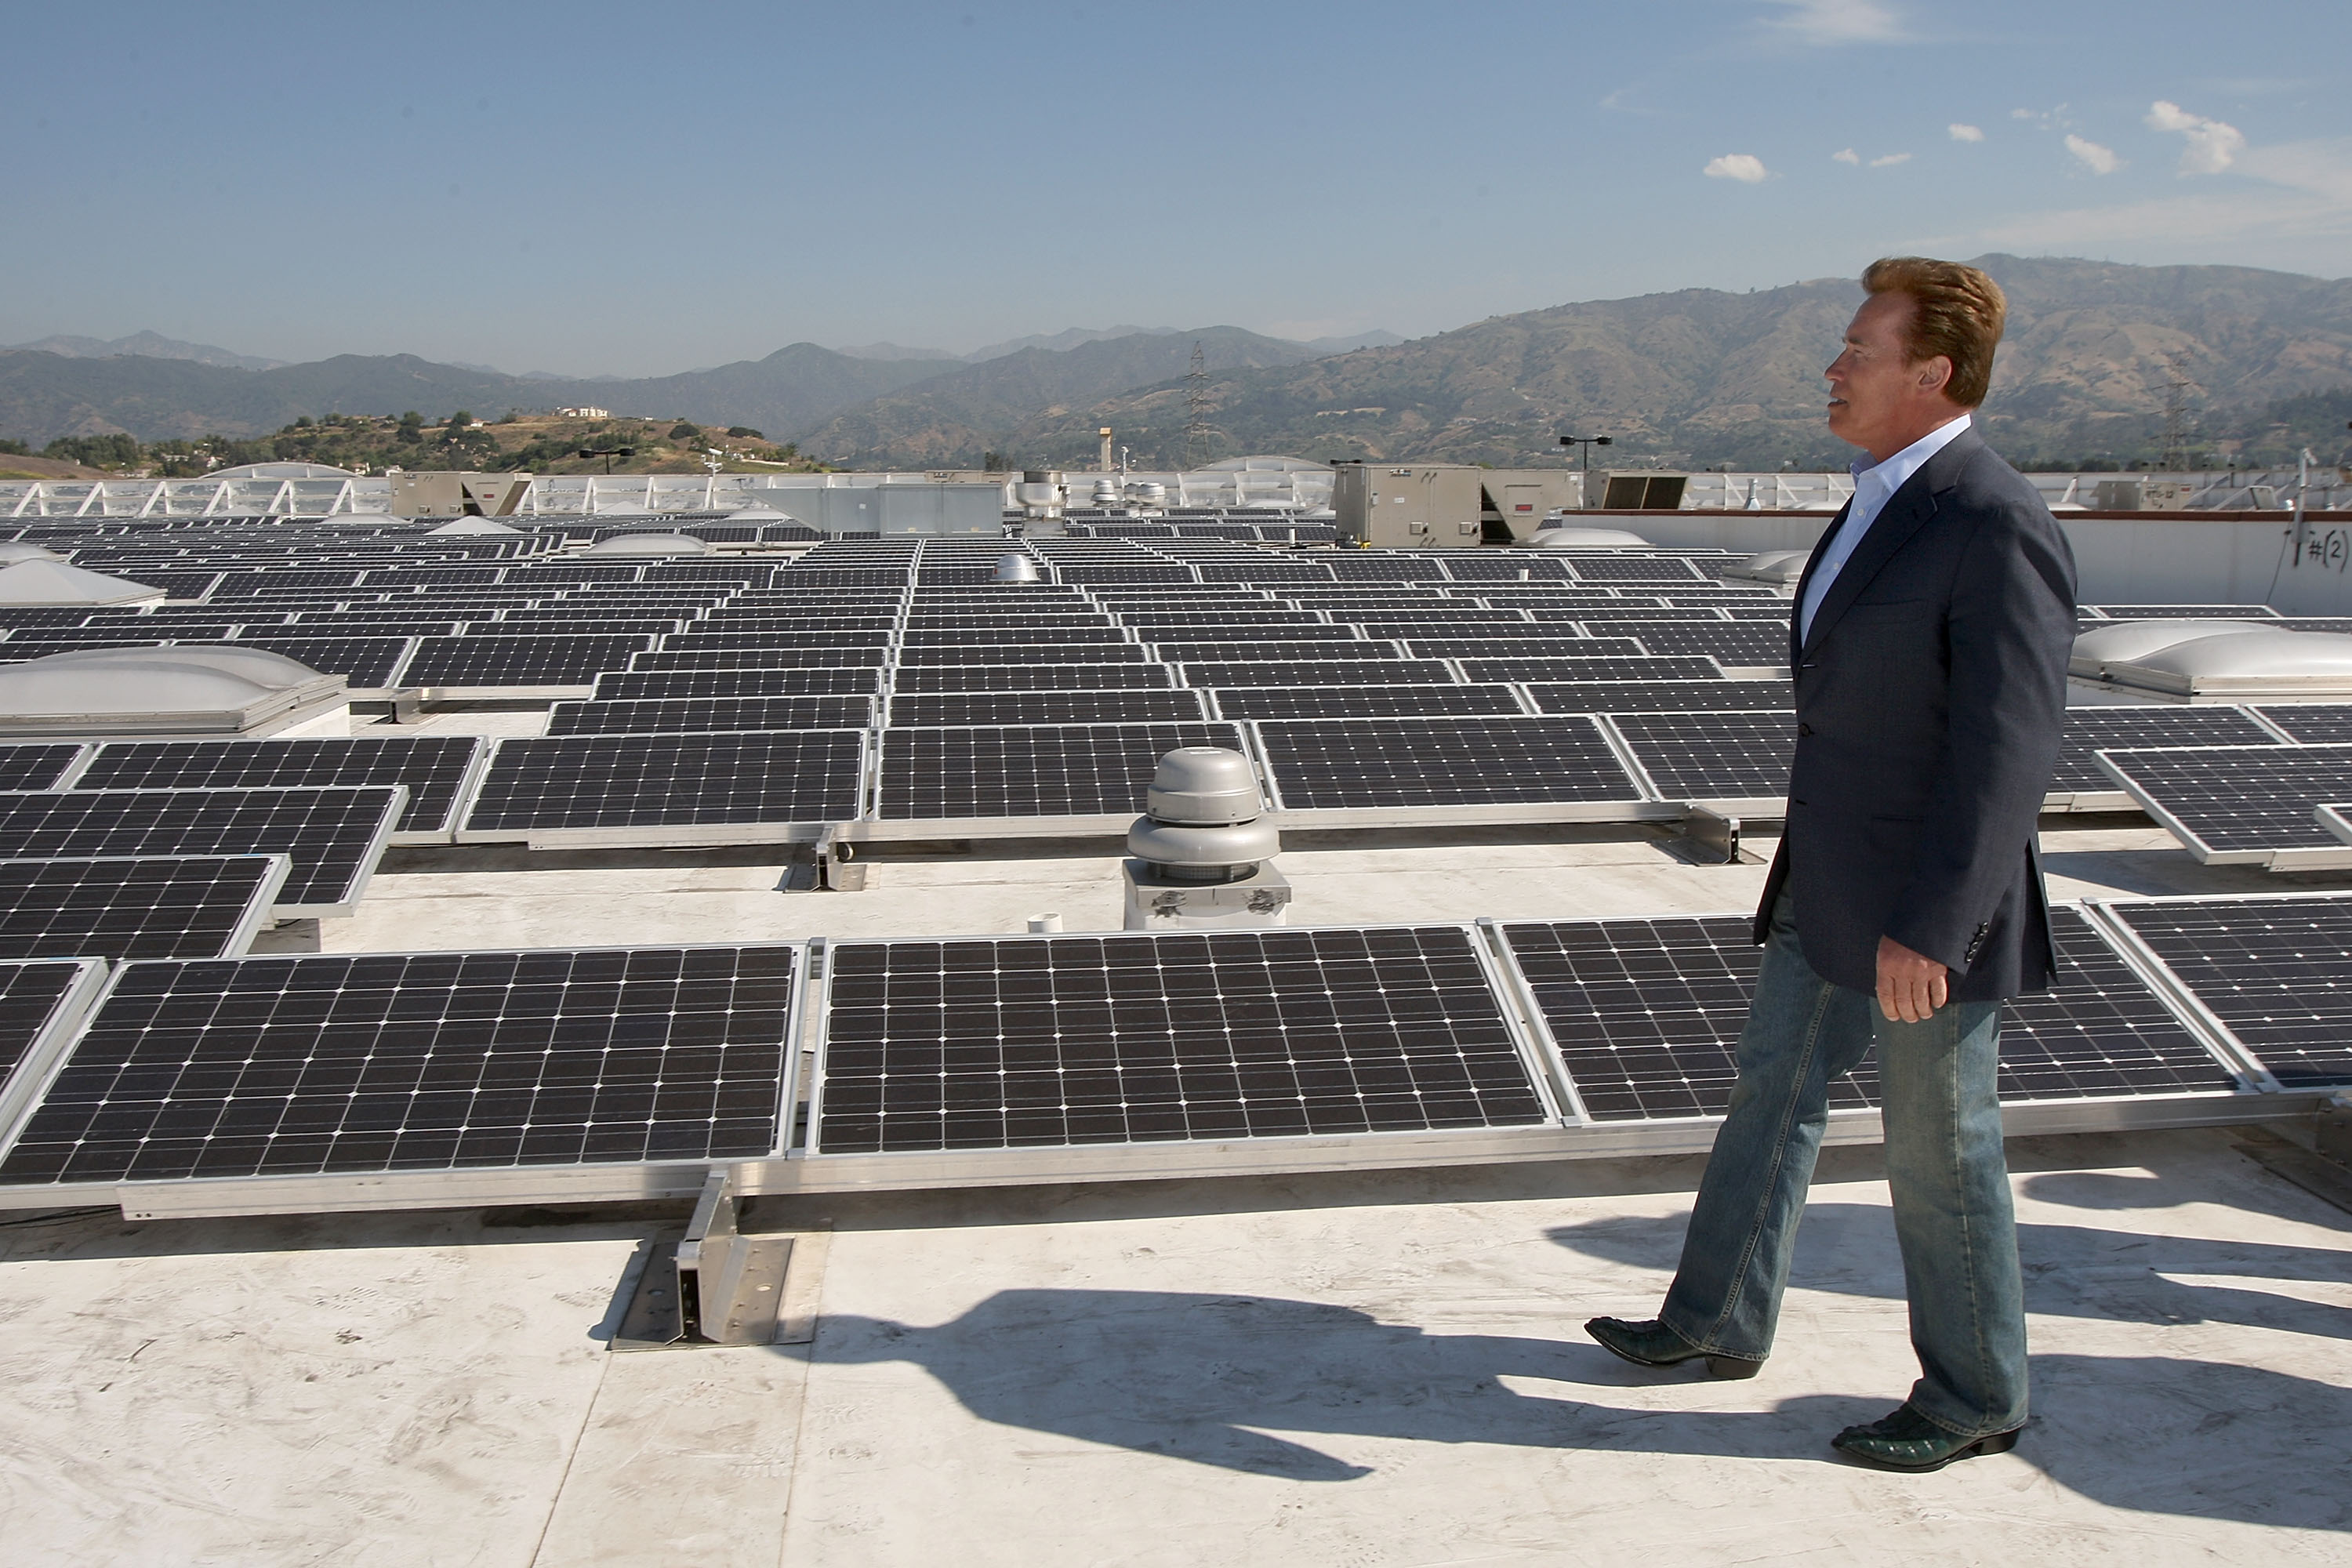 Gov. Schwarzenegger walks on top of a roof surrounded by solar panels.